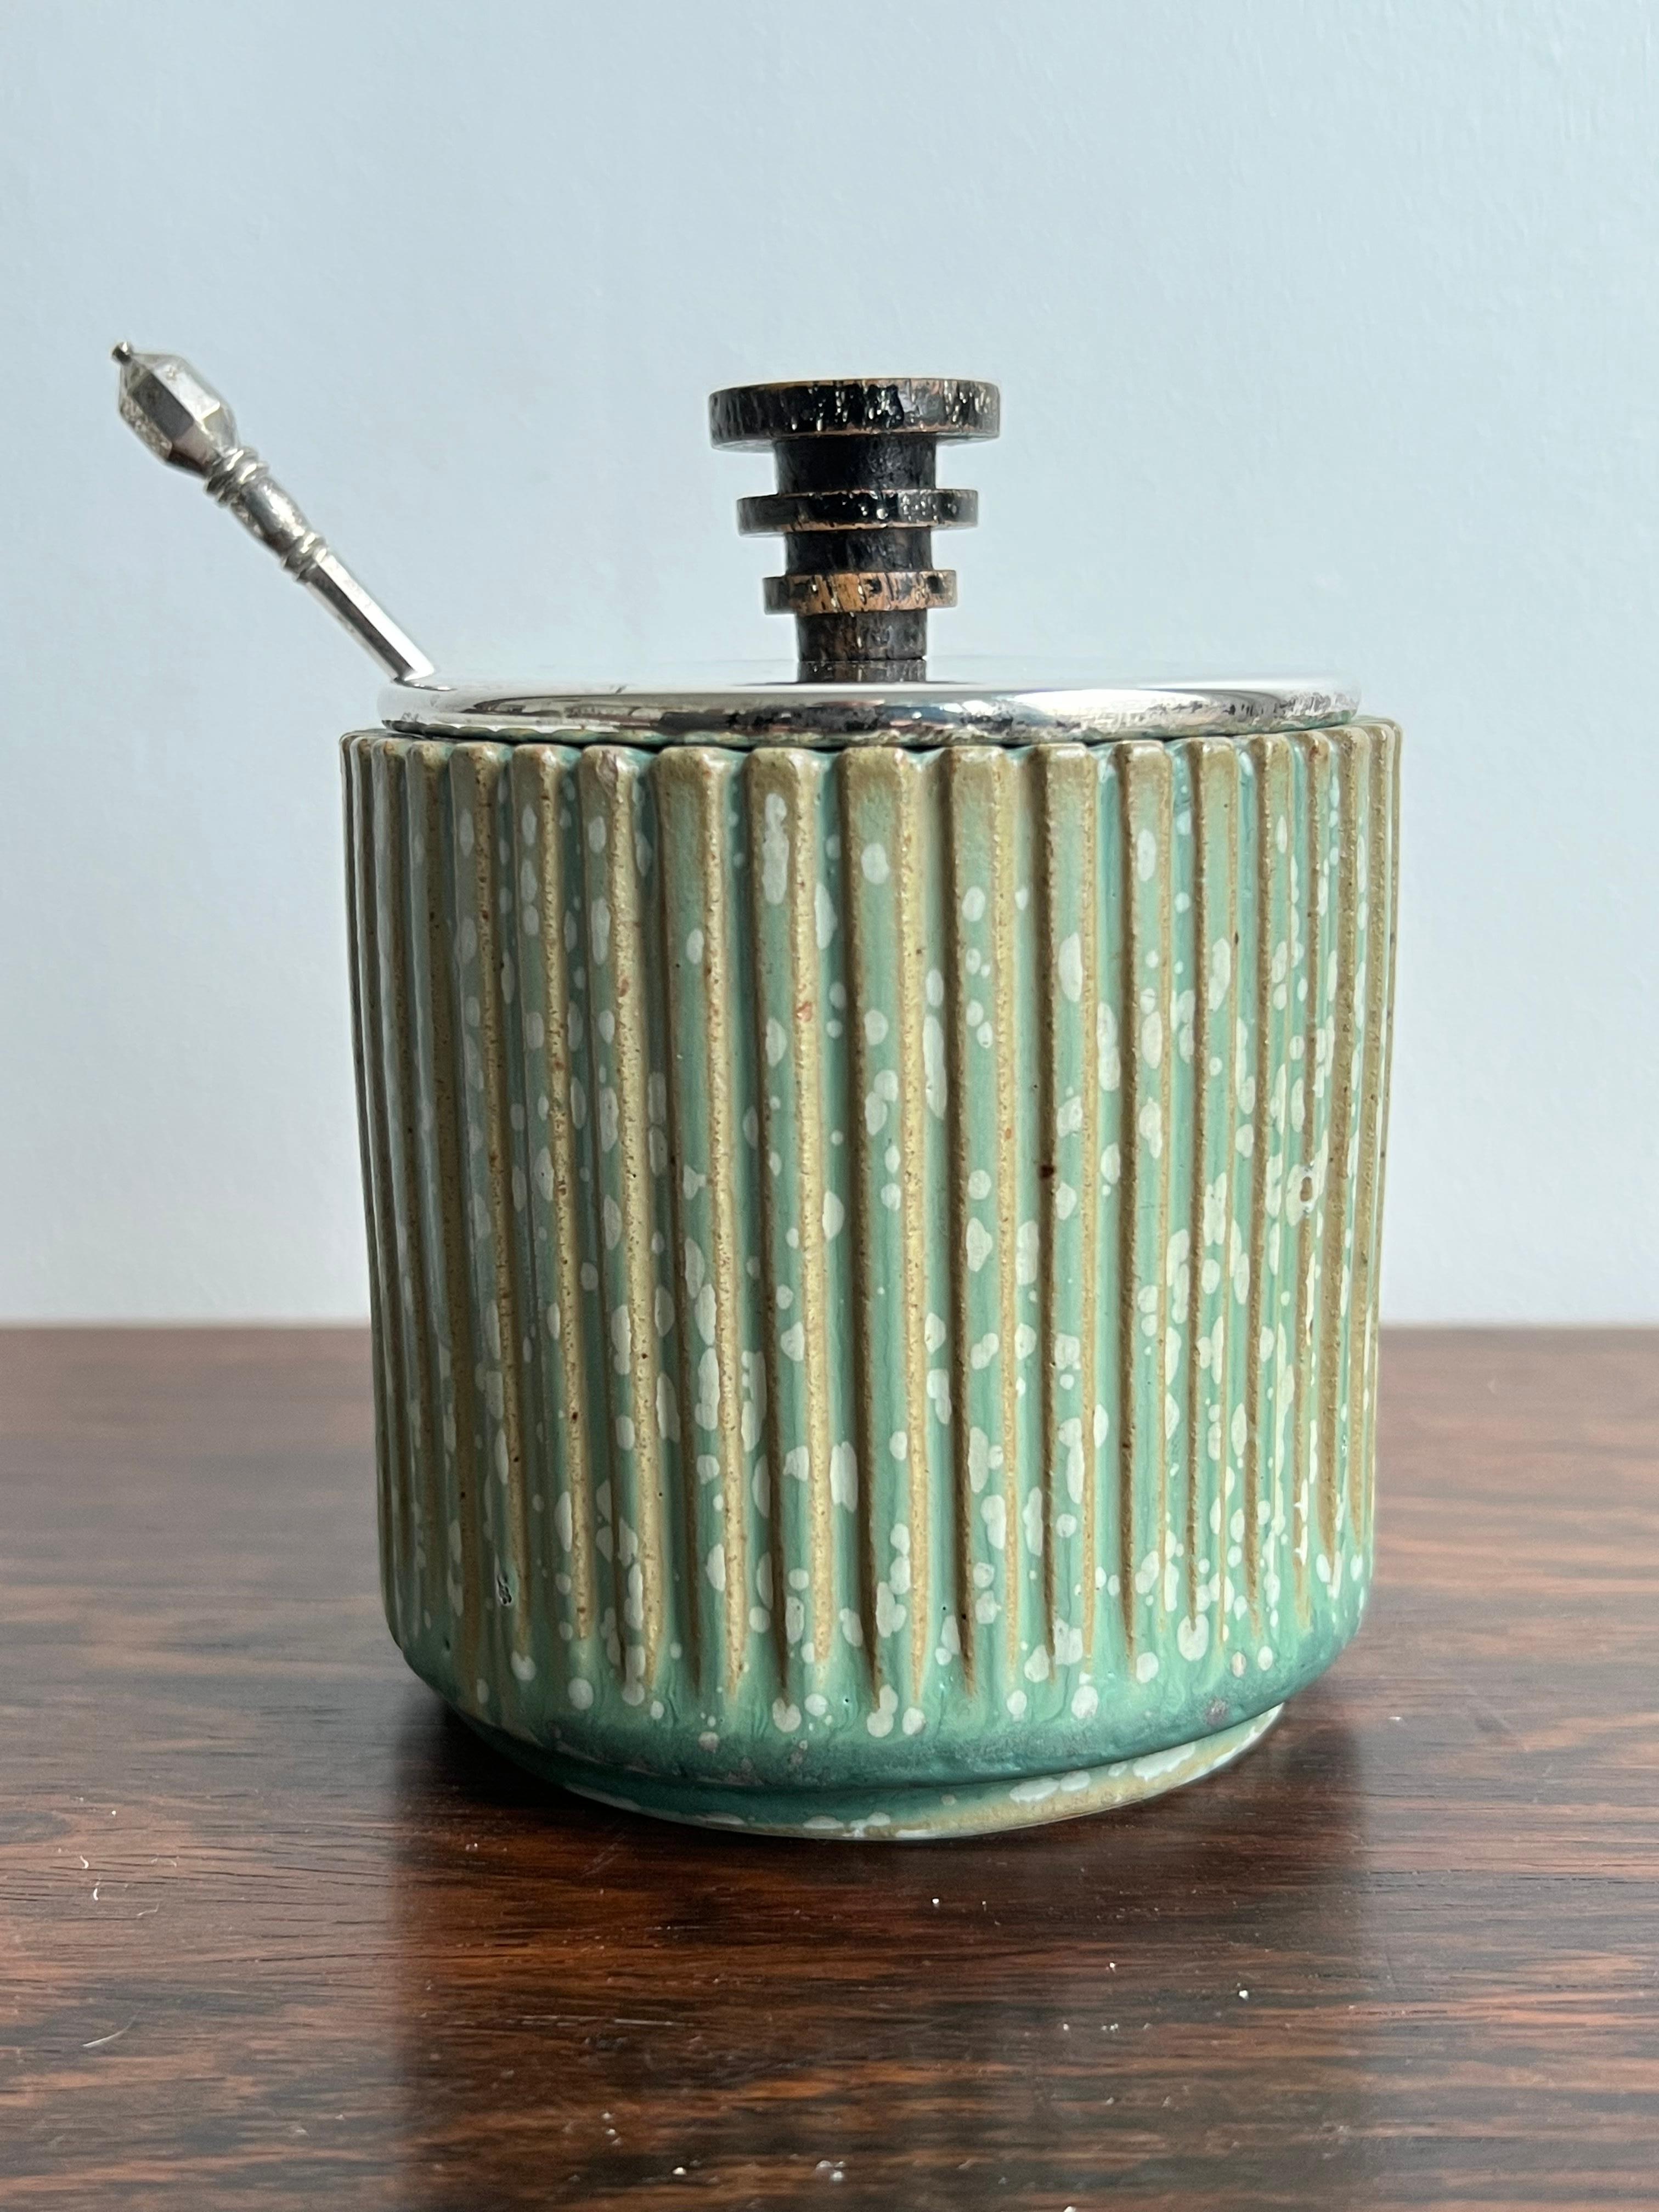 Arne Bang, silver lidded marmelade jar with fine fluted exterior and covered with a charming speckled glaze in tones of green, creme, gray and blues. It carries a silver lid with a handle made of painted (worn) wood and dated 1939, which is also the